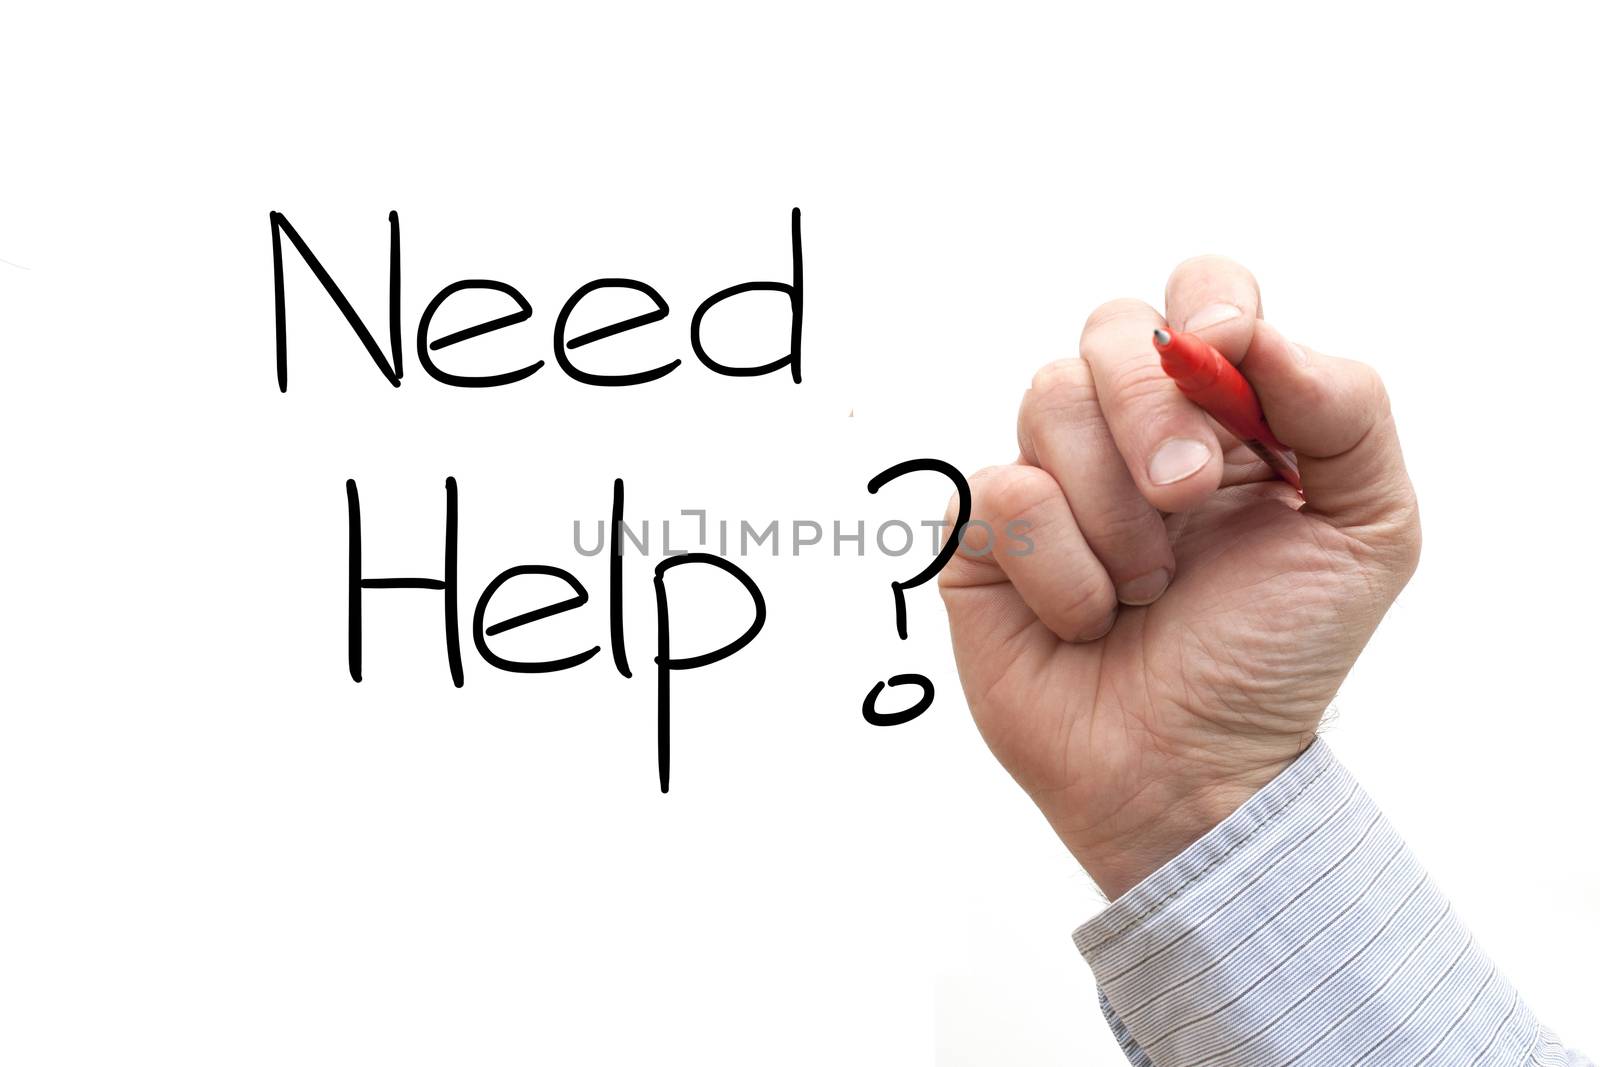 A Photo / Illustration of a Hand Writing 'Need Help?'